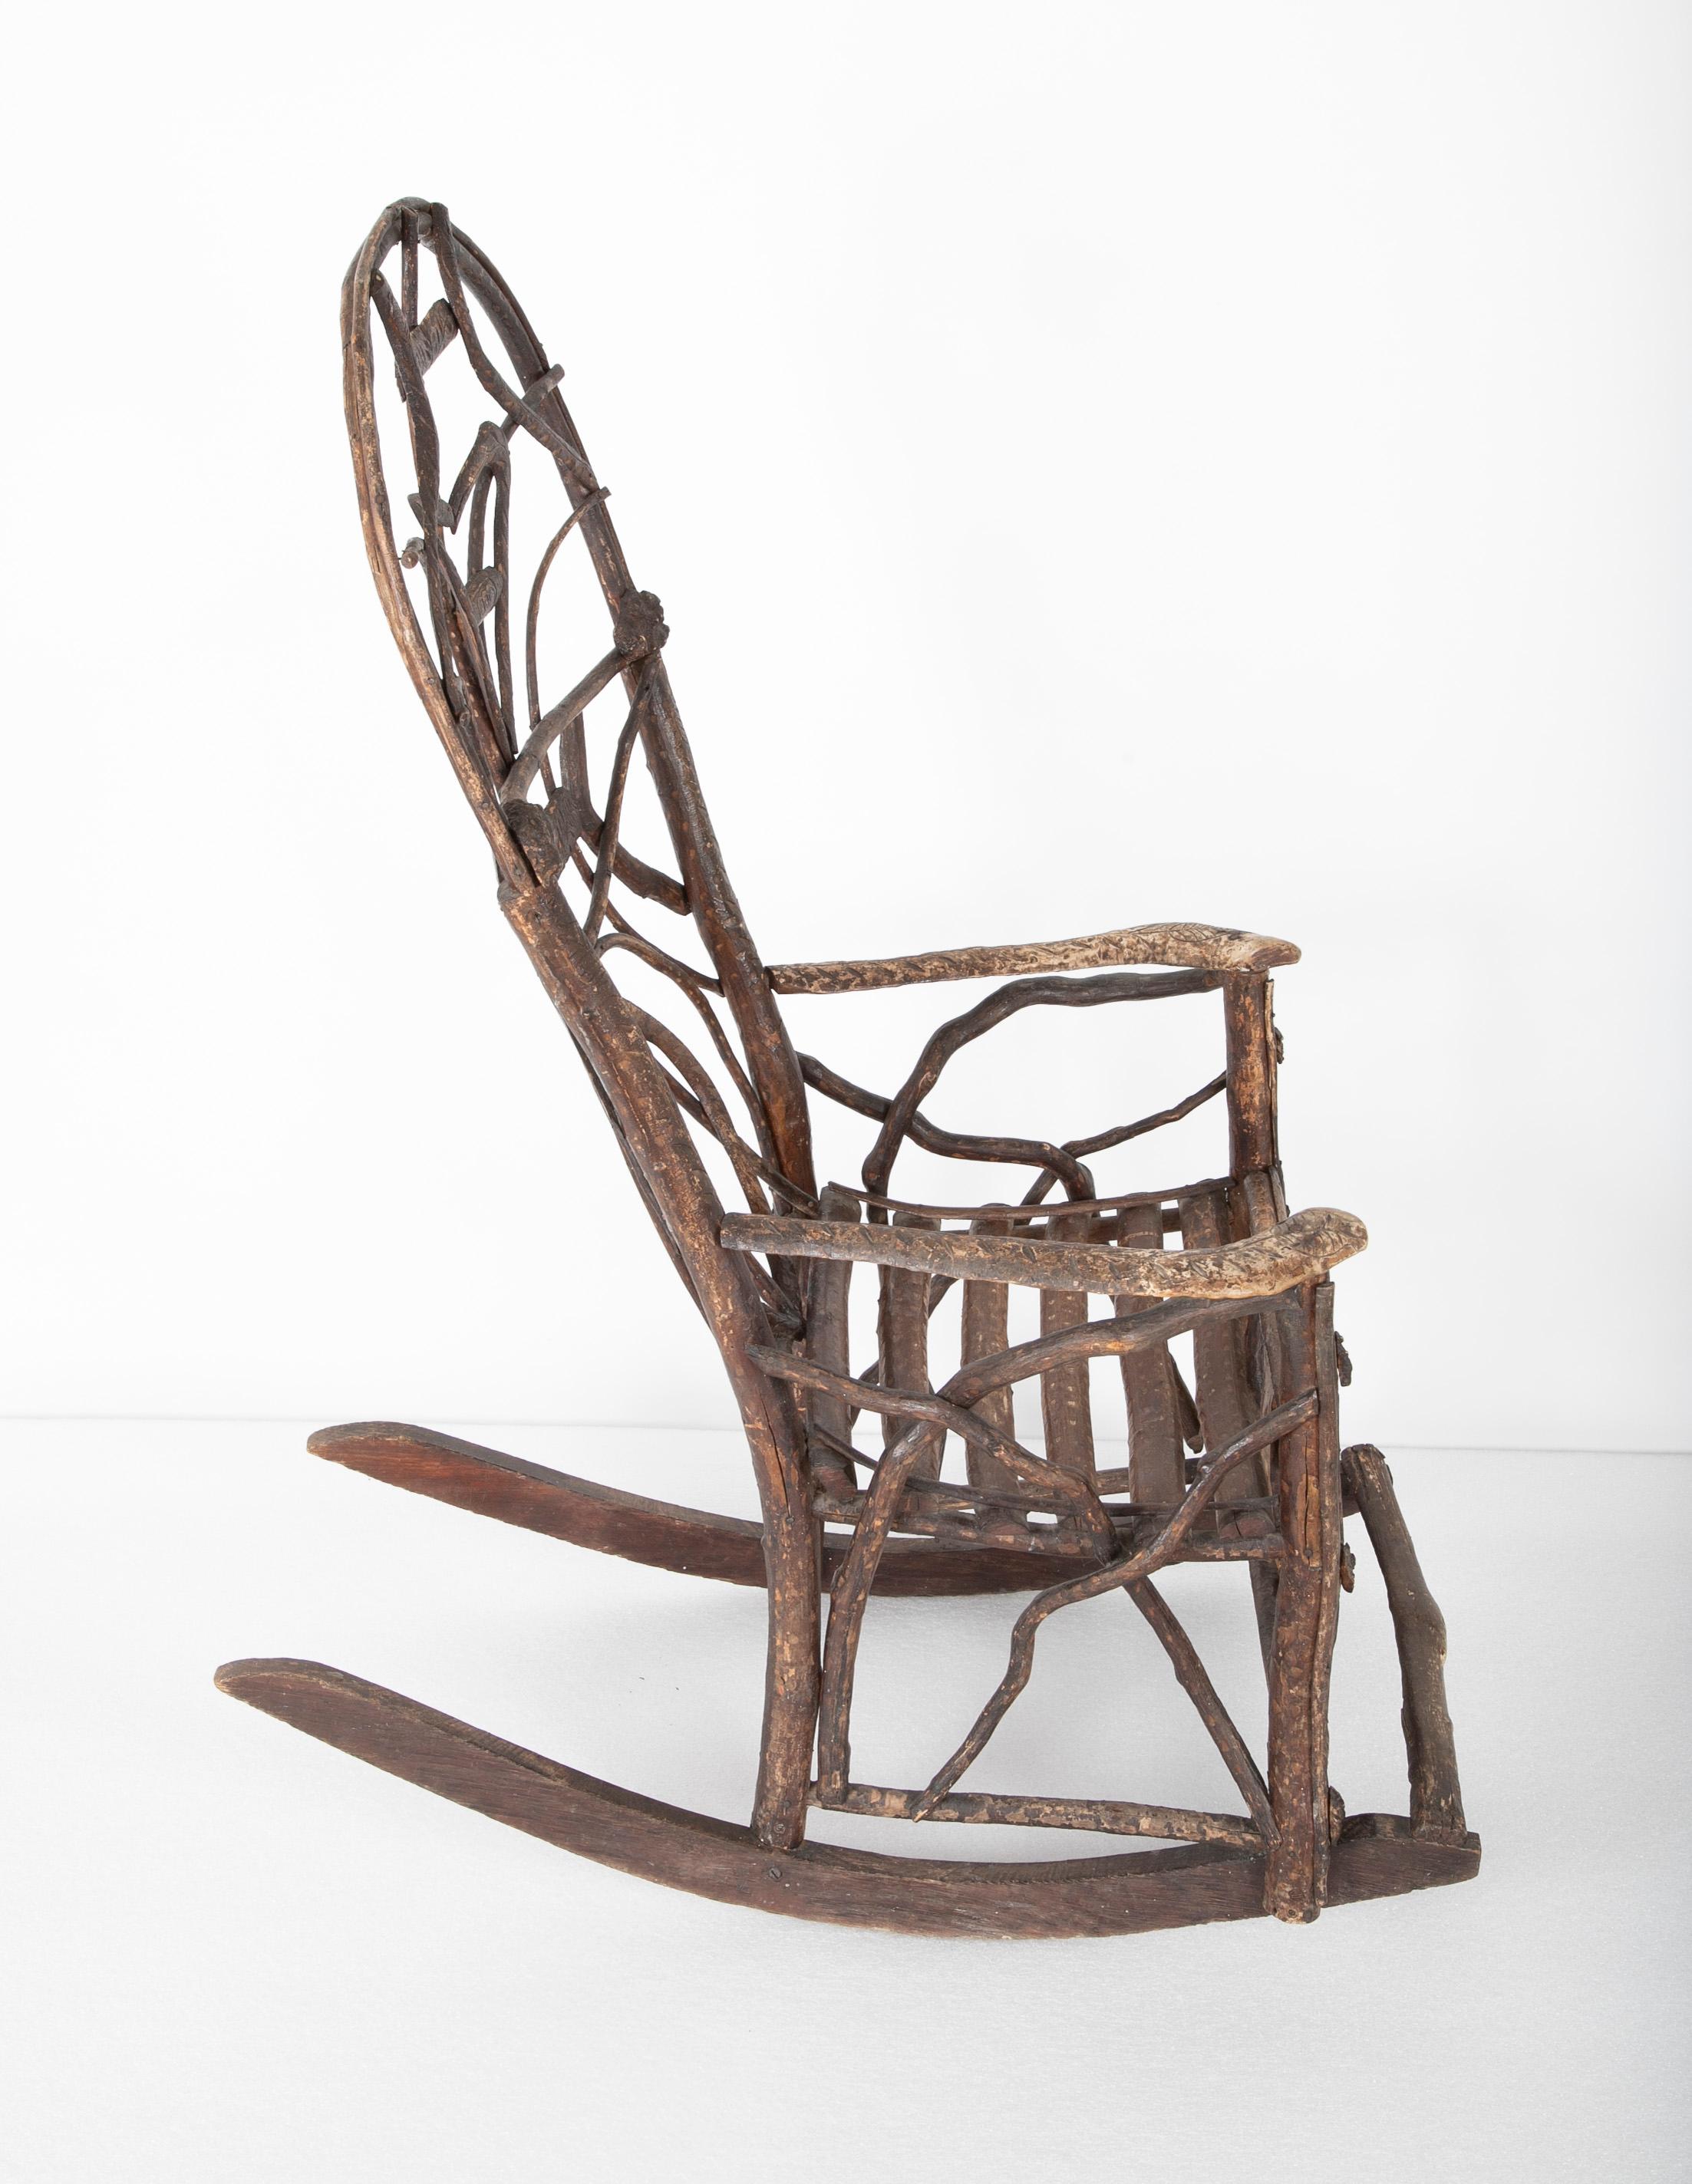 Wood Rustic Rocking Chair Attributed to Rev. Ben Davis of Blowing Rock, NC